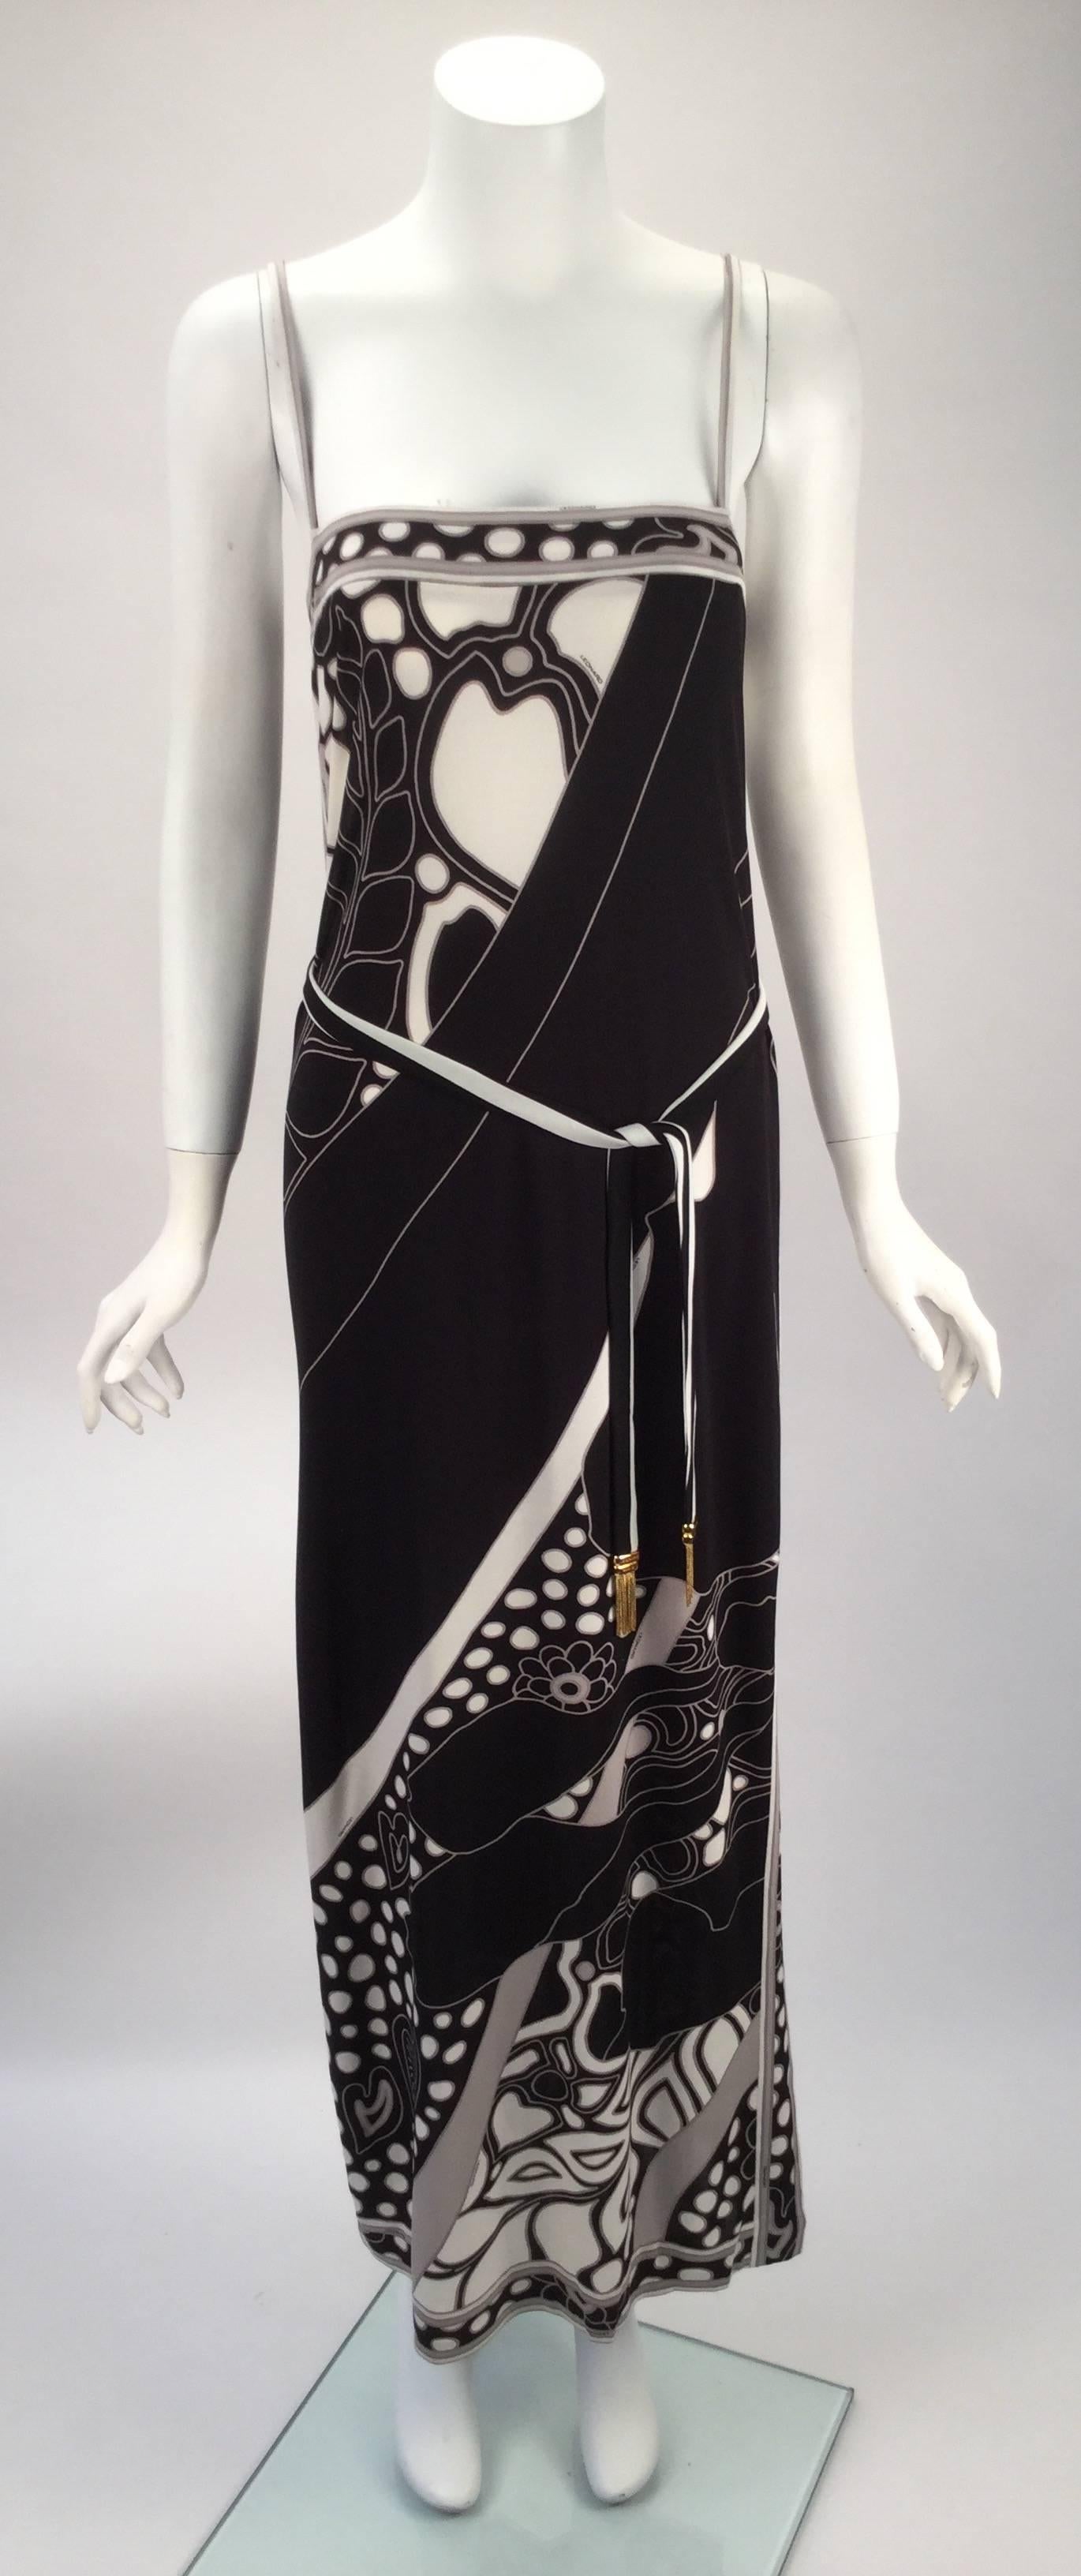 Said to have been inspired by the beautiful leopard moth this silk jersey knit spaghetti strap dress has a black and white print. Print design is highlighted with grey. Dress has a left split hem. Straight column silhouette. The jacket is originally